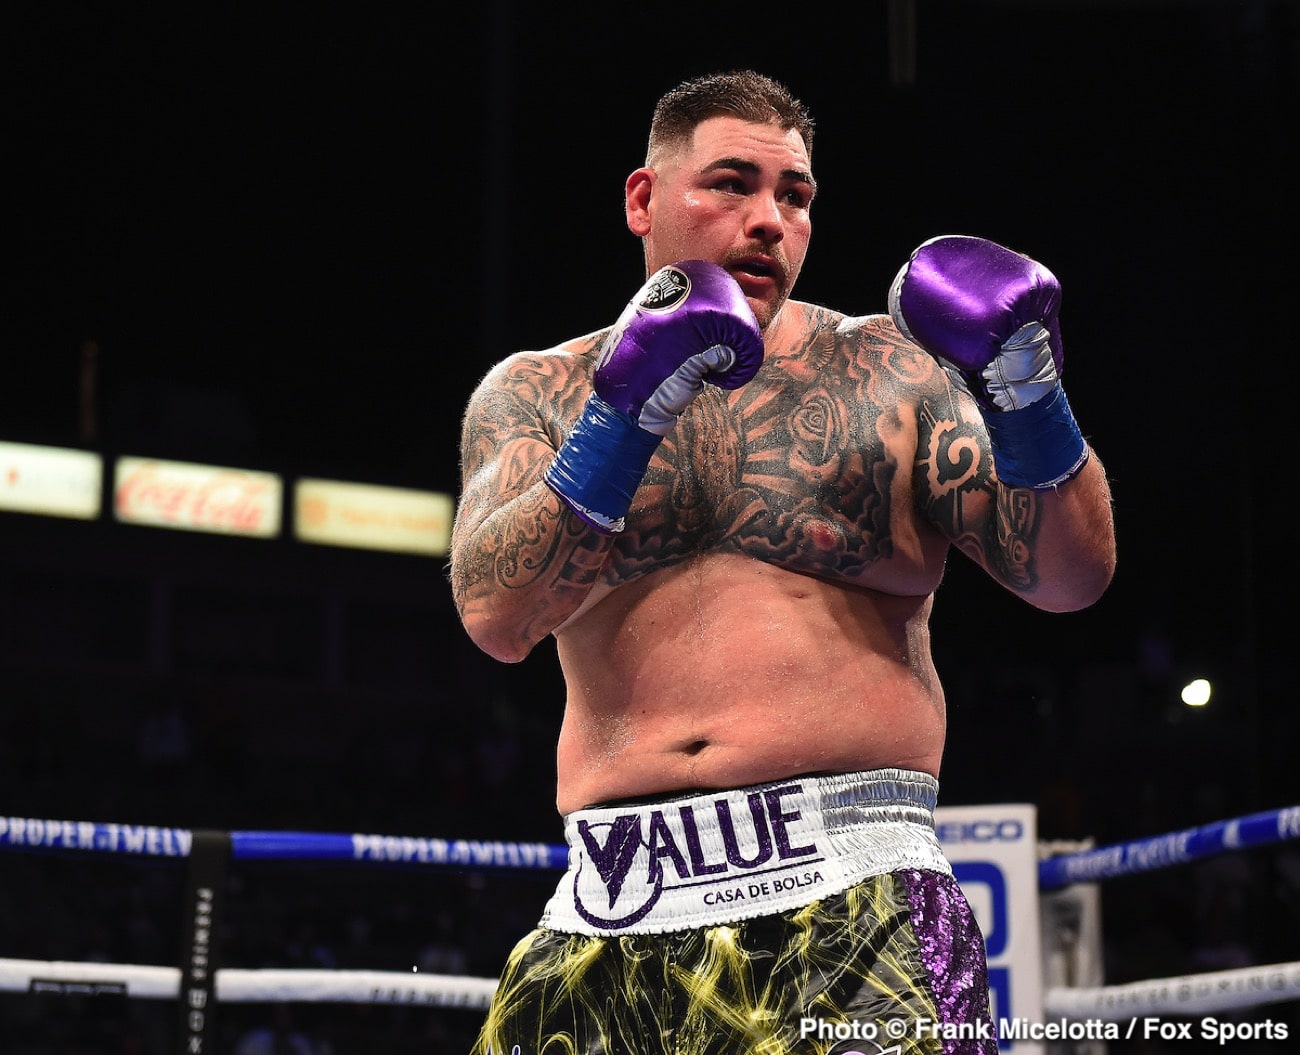 Image: Andy Ruiz Jr won't replace Fury to fight Wilder on July 24th